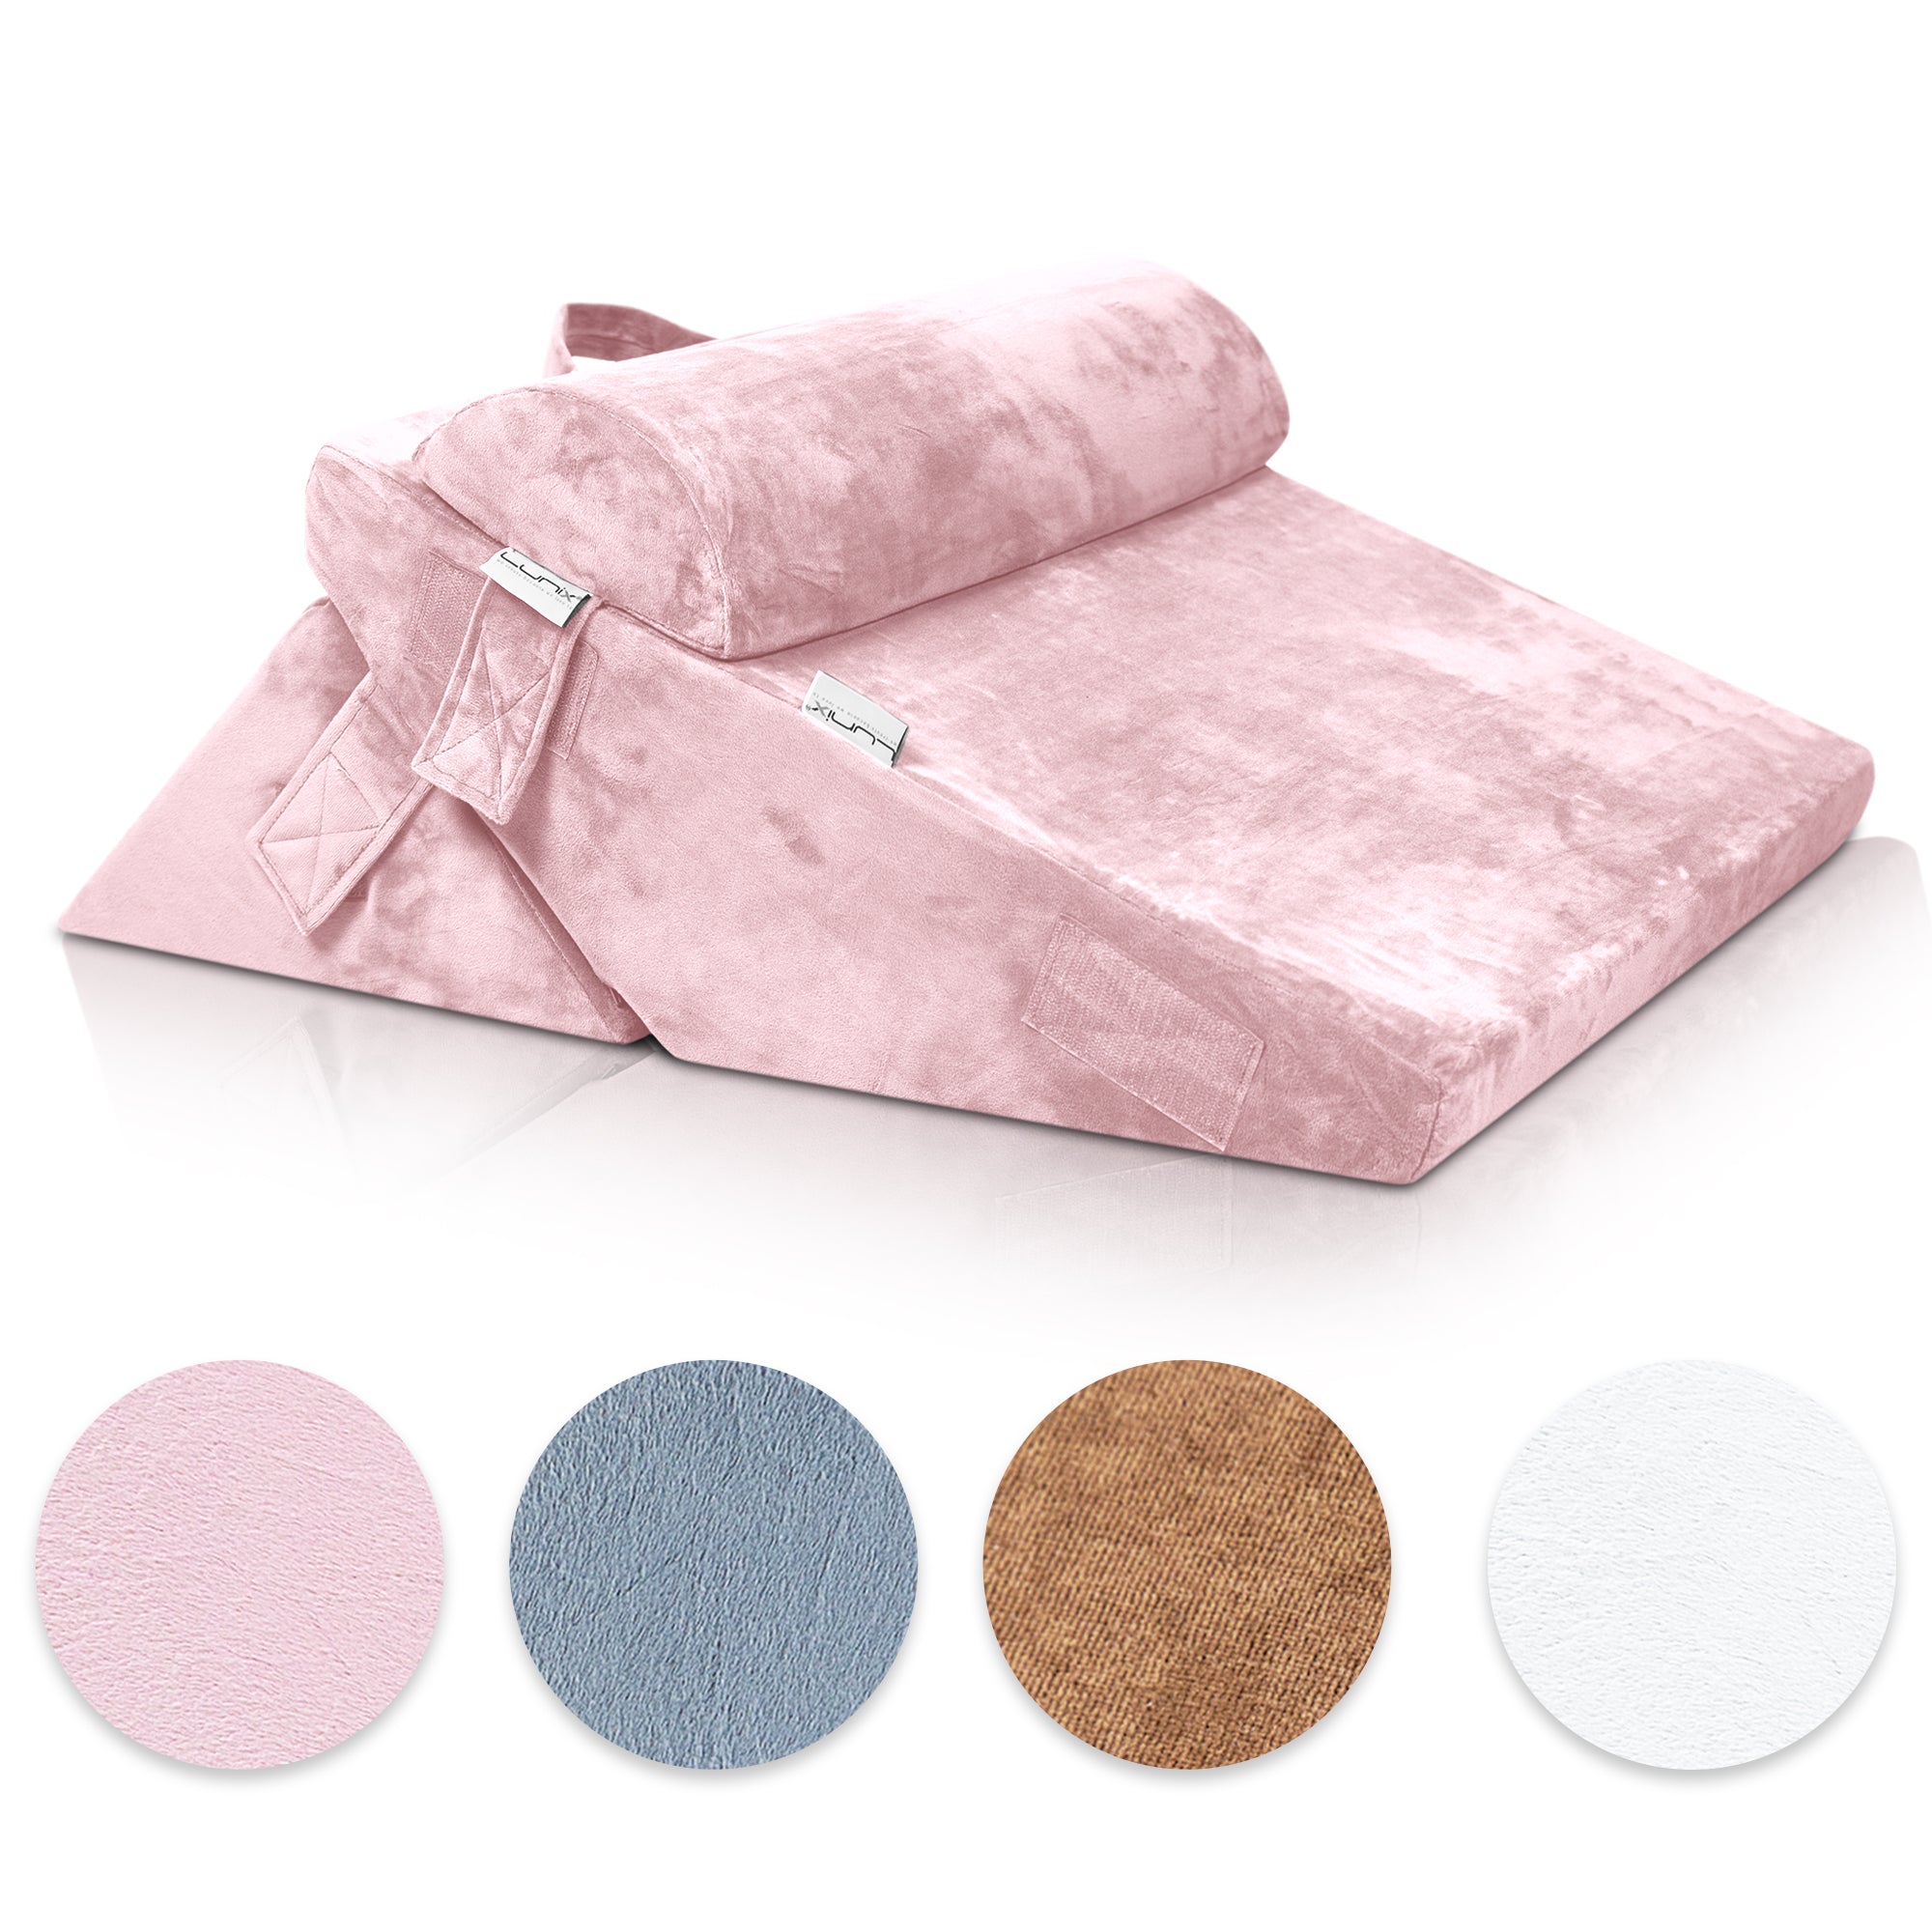 Cover Set Only for LX6, Pink Plush, Pillows and Foam not Included